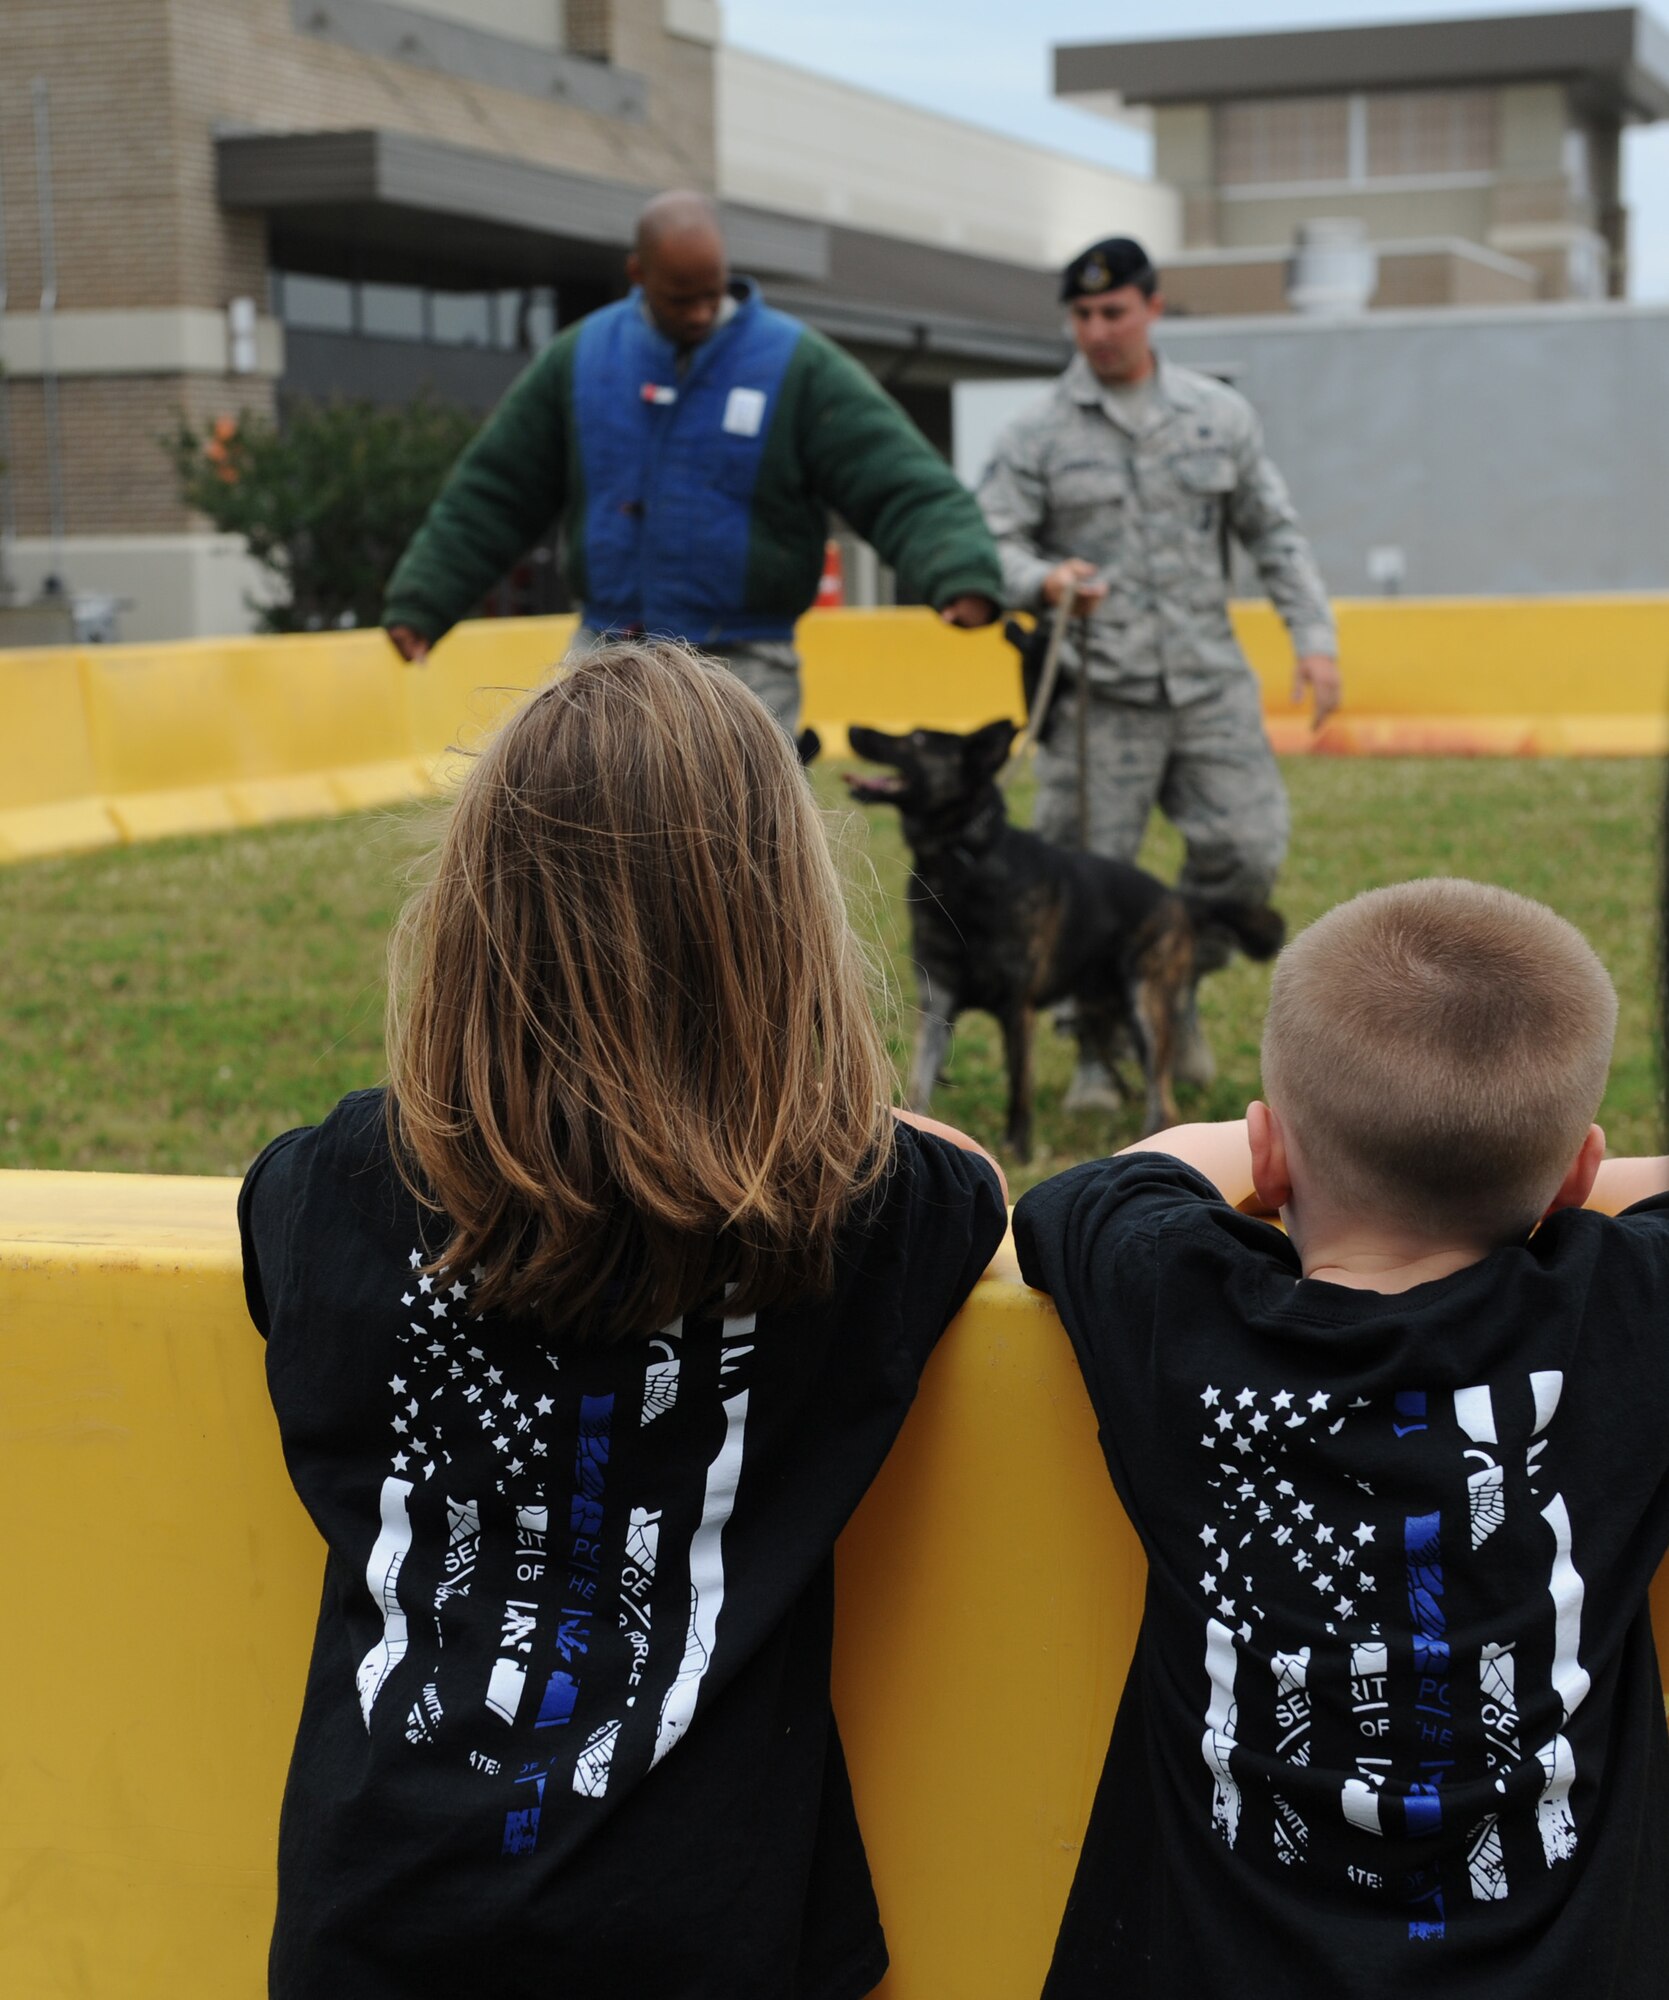 LJ McCormick, daughter of Staff Sgt. Kelli McCormick, 81st Security Forces Squadron police services NCO in charge, and Jaxsen Sproston, son of Maj. Devin Sproston, 81st SFS commander, watch a military working dog demo during the 81st SFS Fun Day at the base exchange May 16, 2016, Keesler Air Force Base, Miss. The event was held during National Police Week, which recognizes the service of law enforcement men and women who put their lives at risk every day. (U.S. Air Force photo by Kemberly Groue)